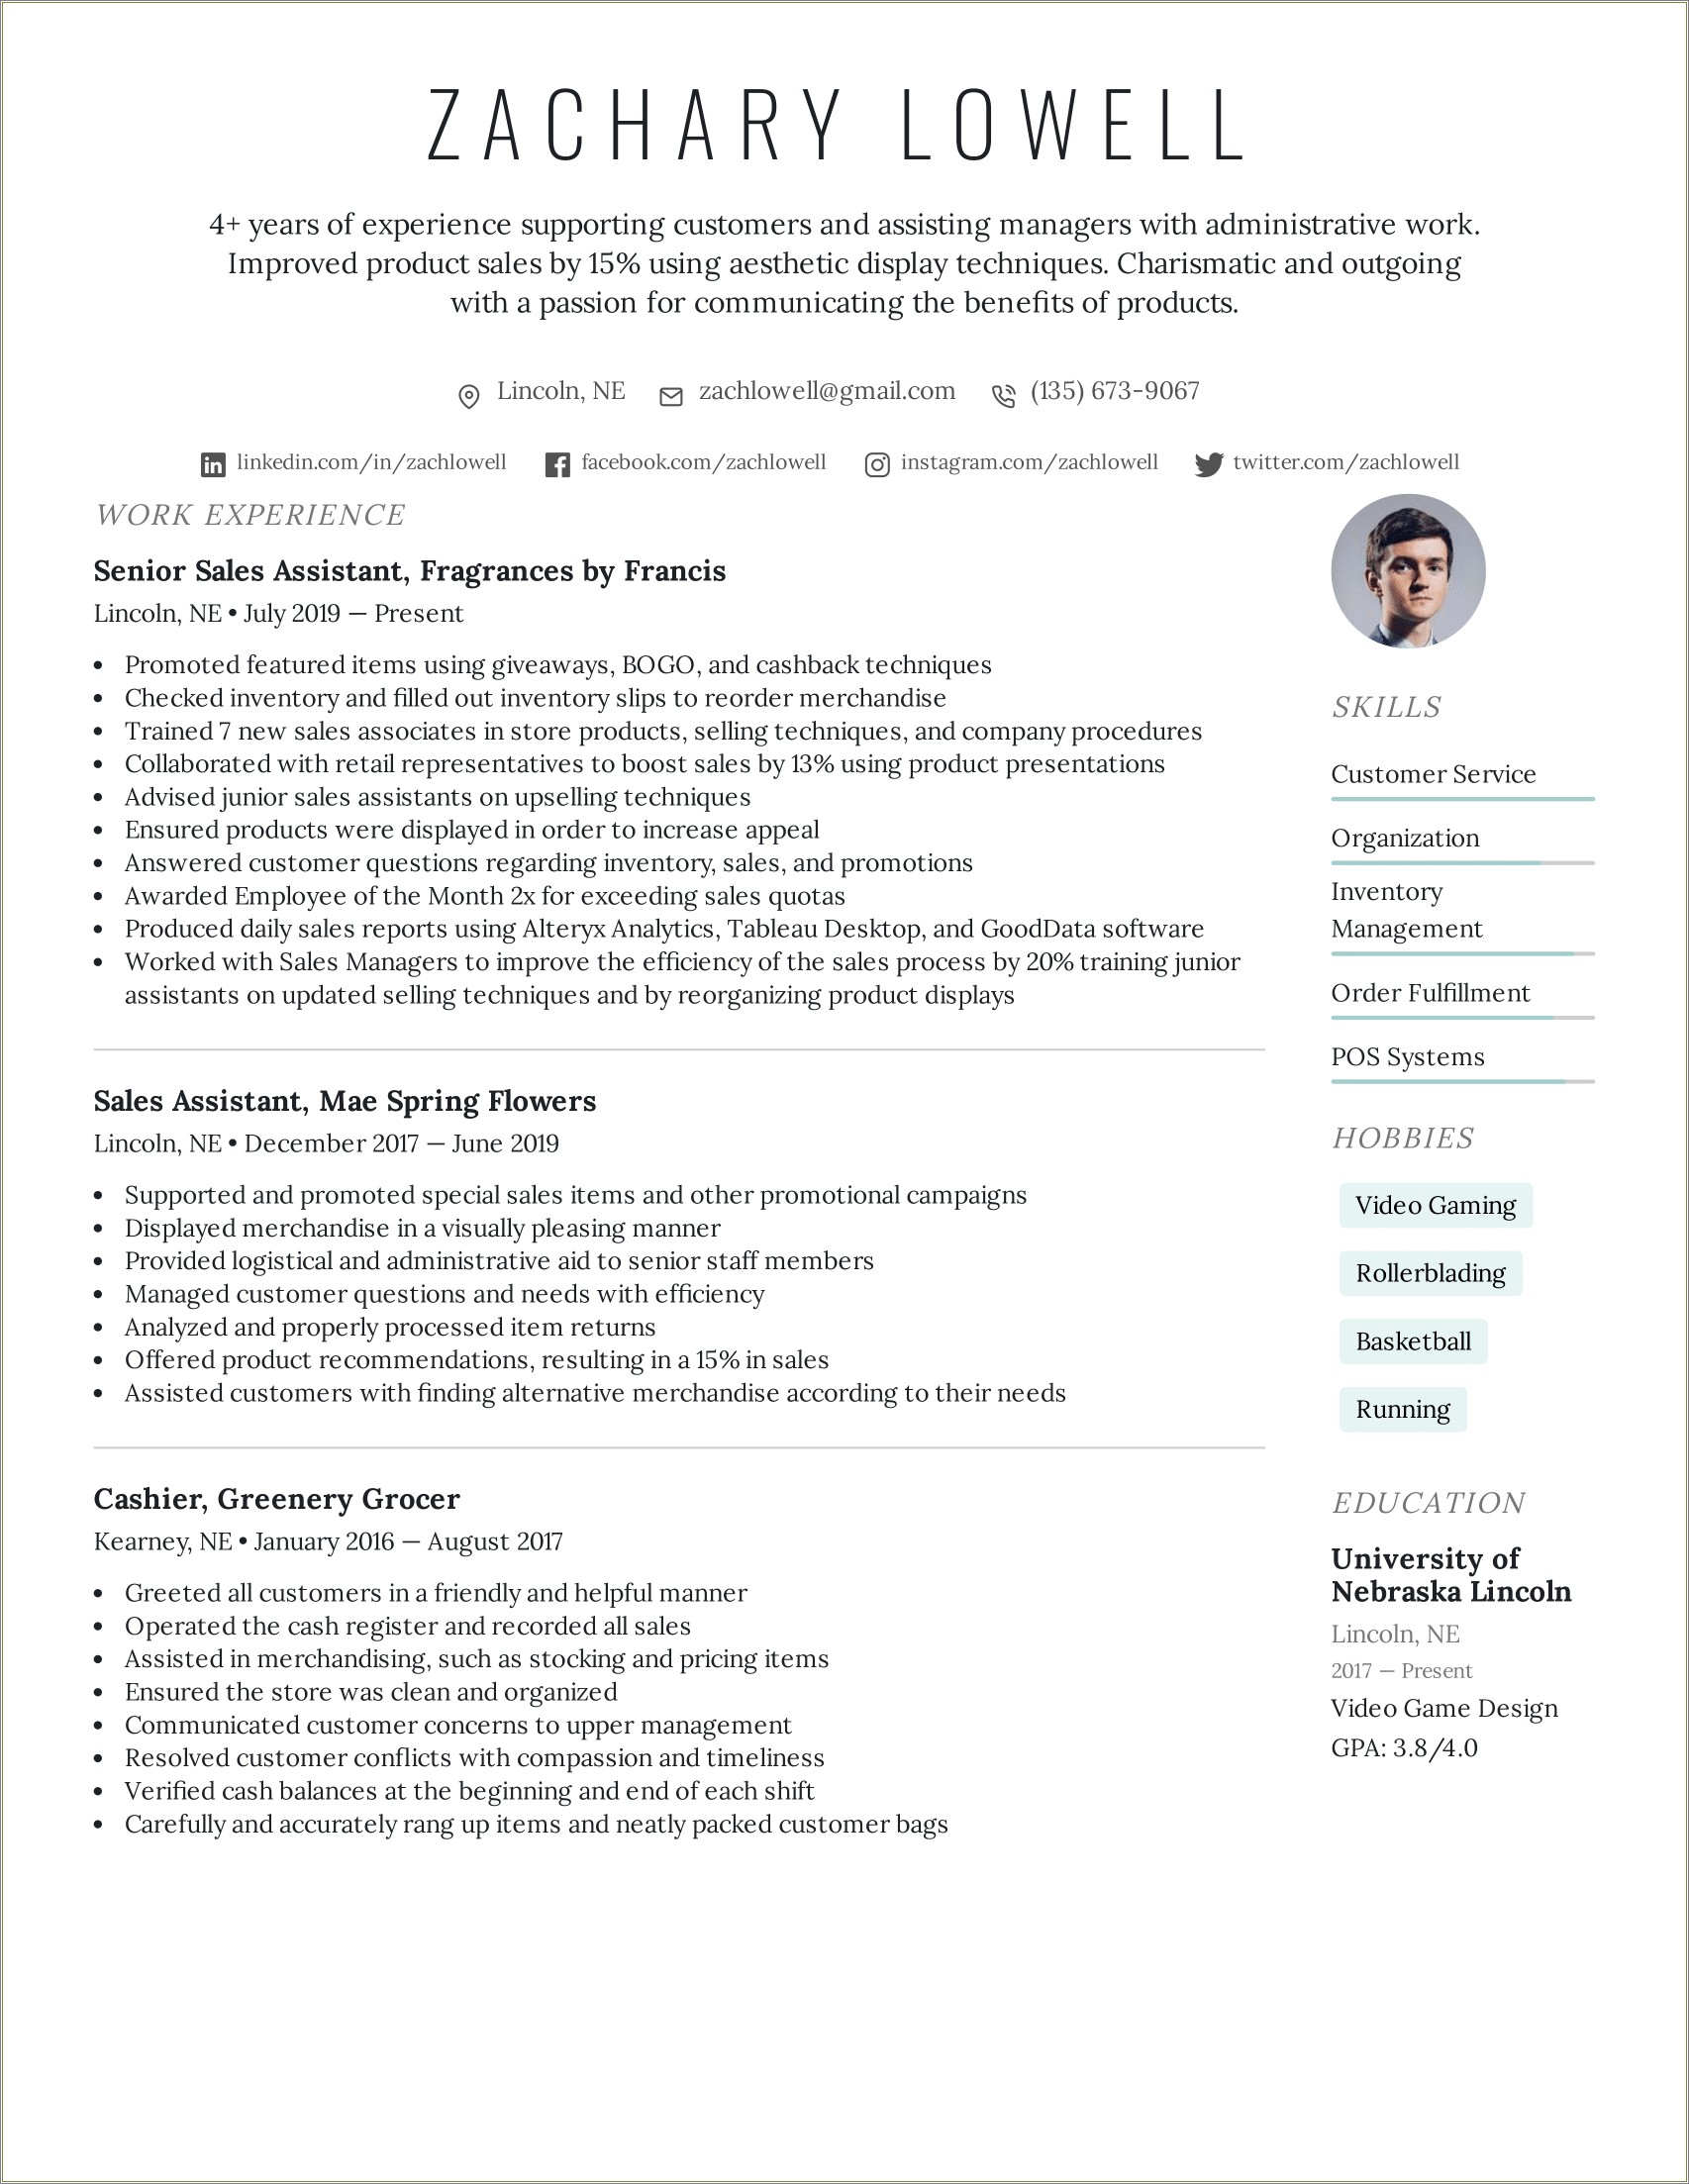 Sample Resume With A Section On Accomplishments